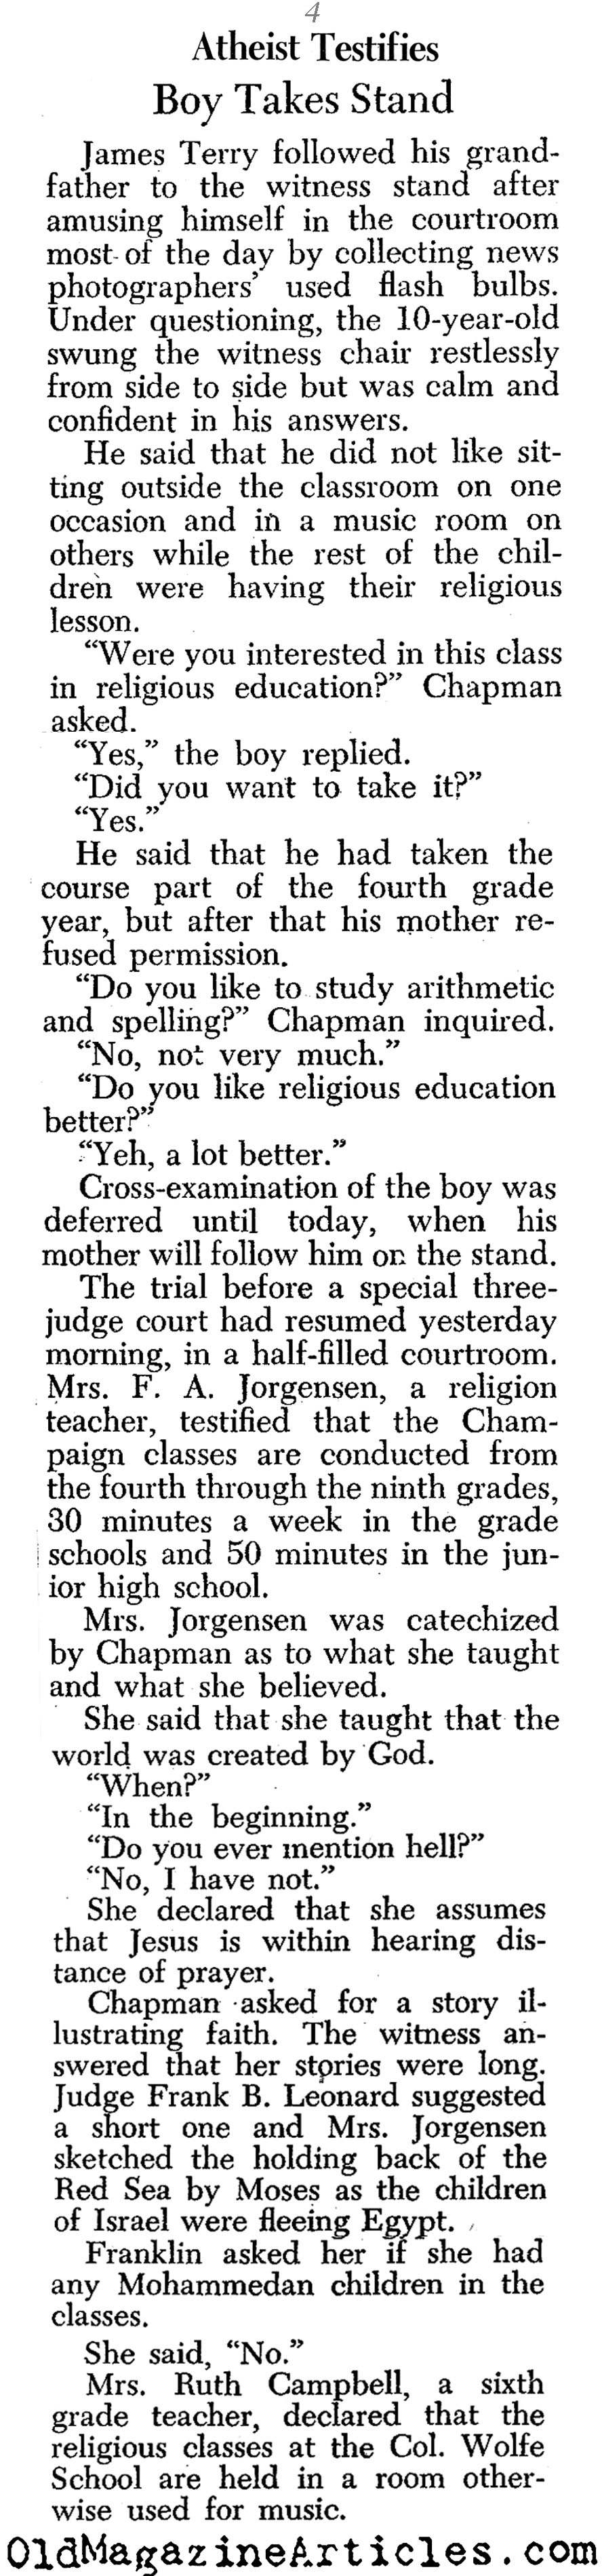 Kicking God Out of the Schools (Newsweek Magazine & PM Tabloid, 1945)